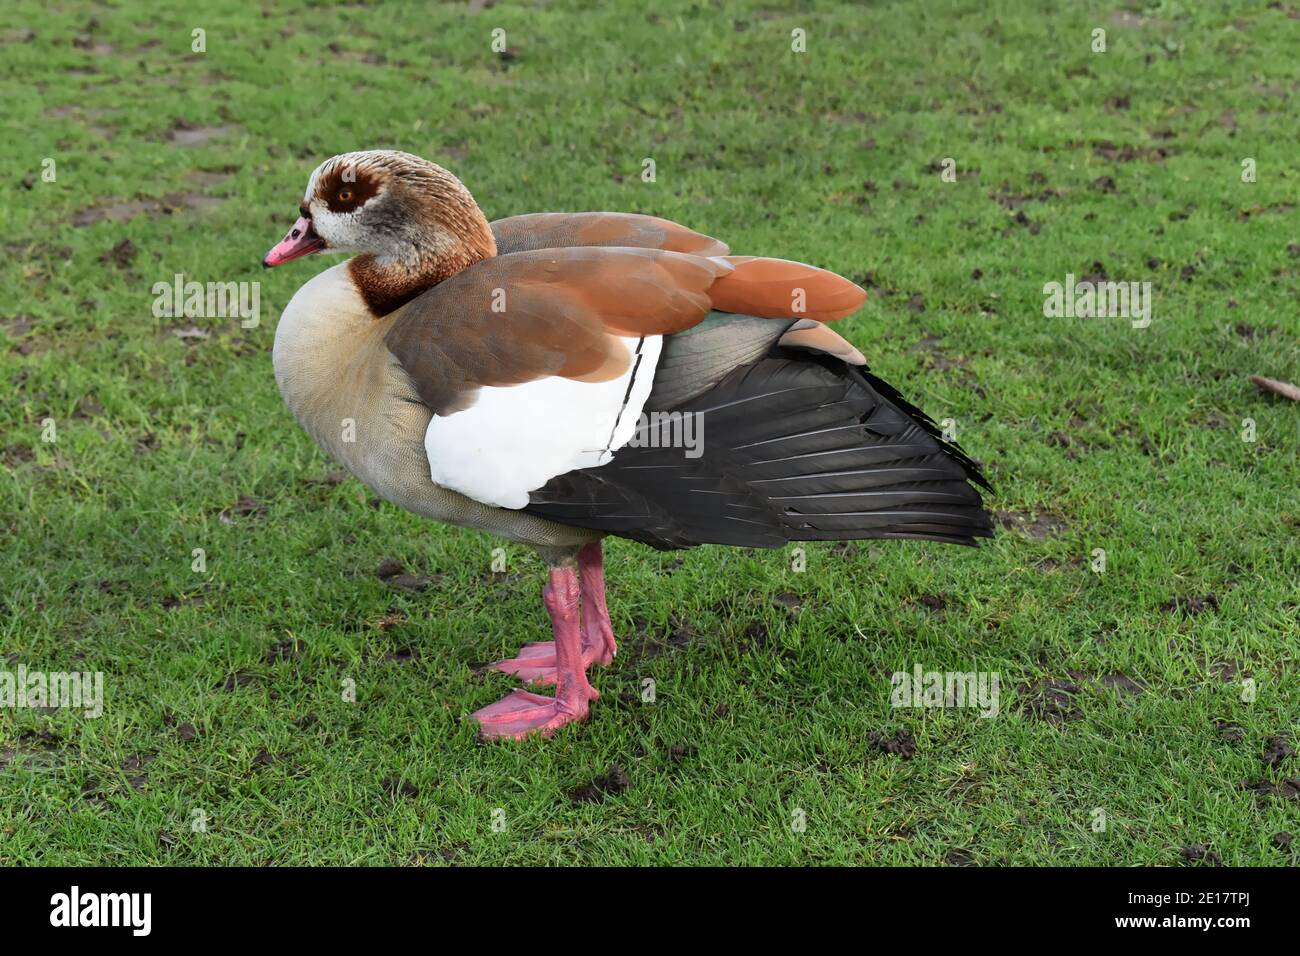 This pale brown and grey goose has dark eye-patch. It was introduced as ornamental wildfowl but escaped to the wild and is now breeding in feral state Stock Photo